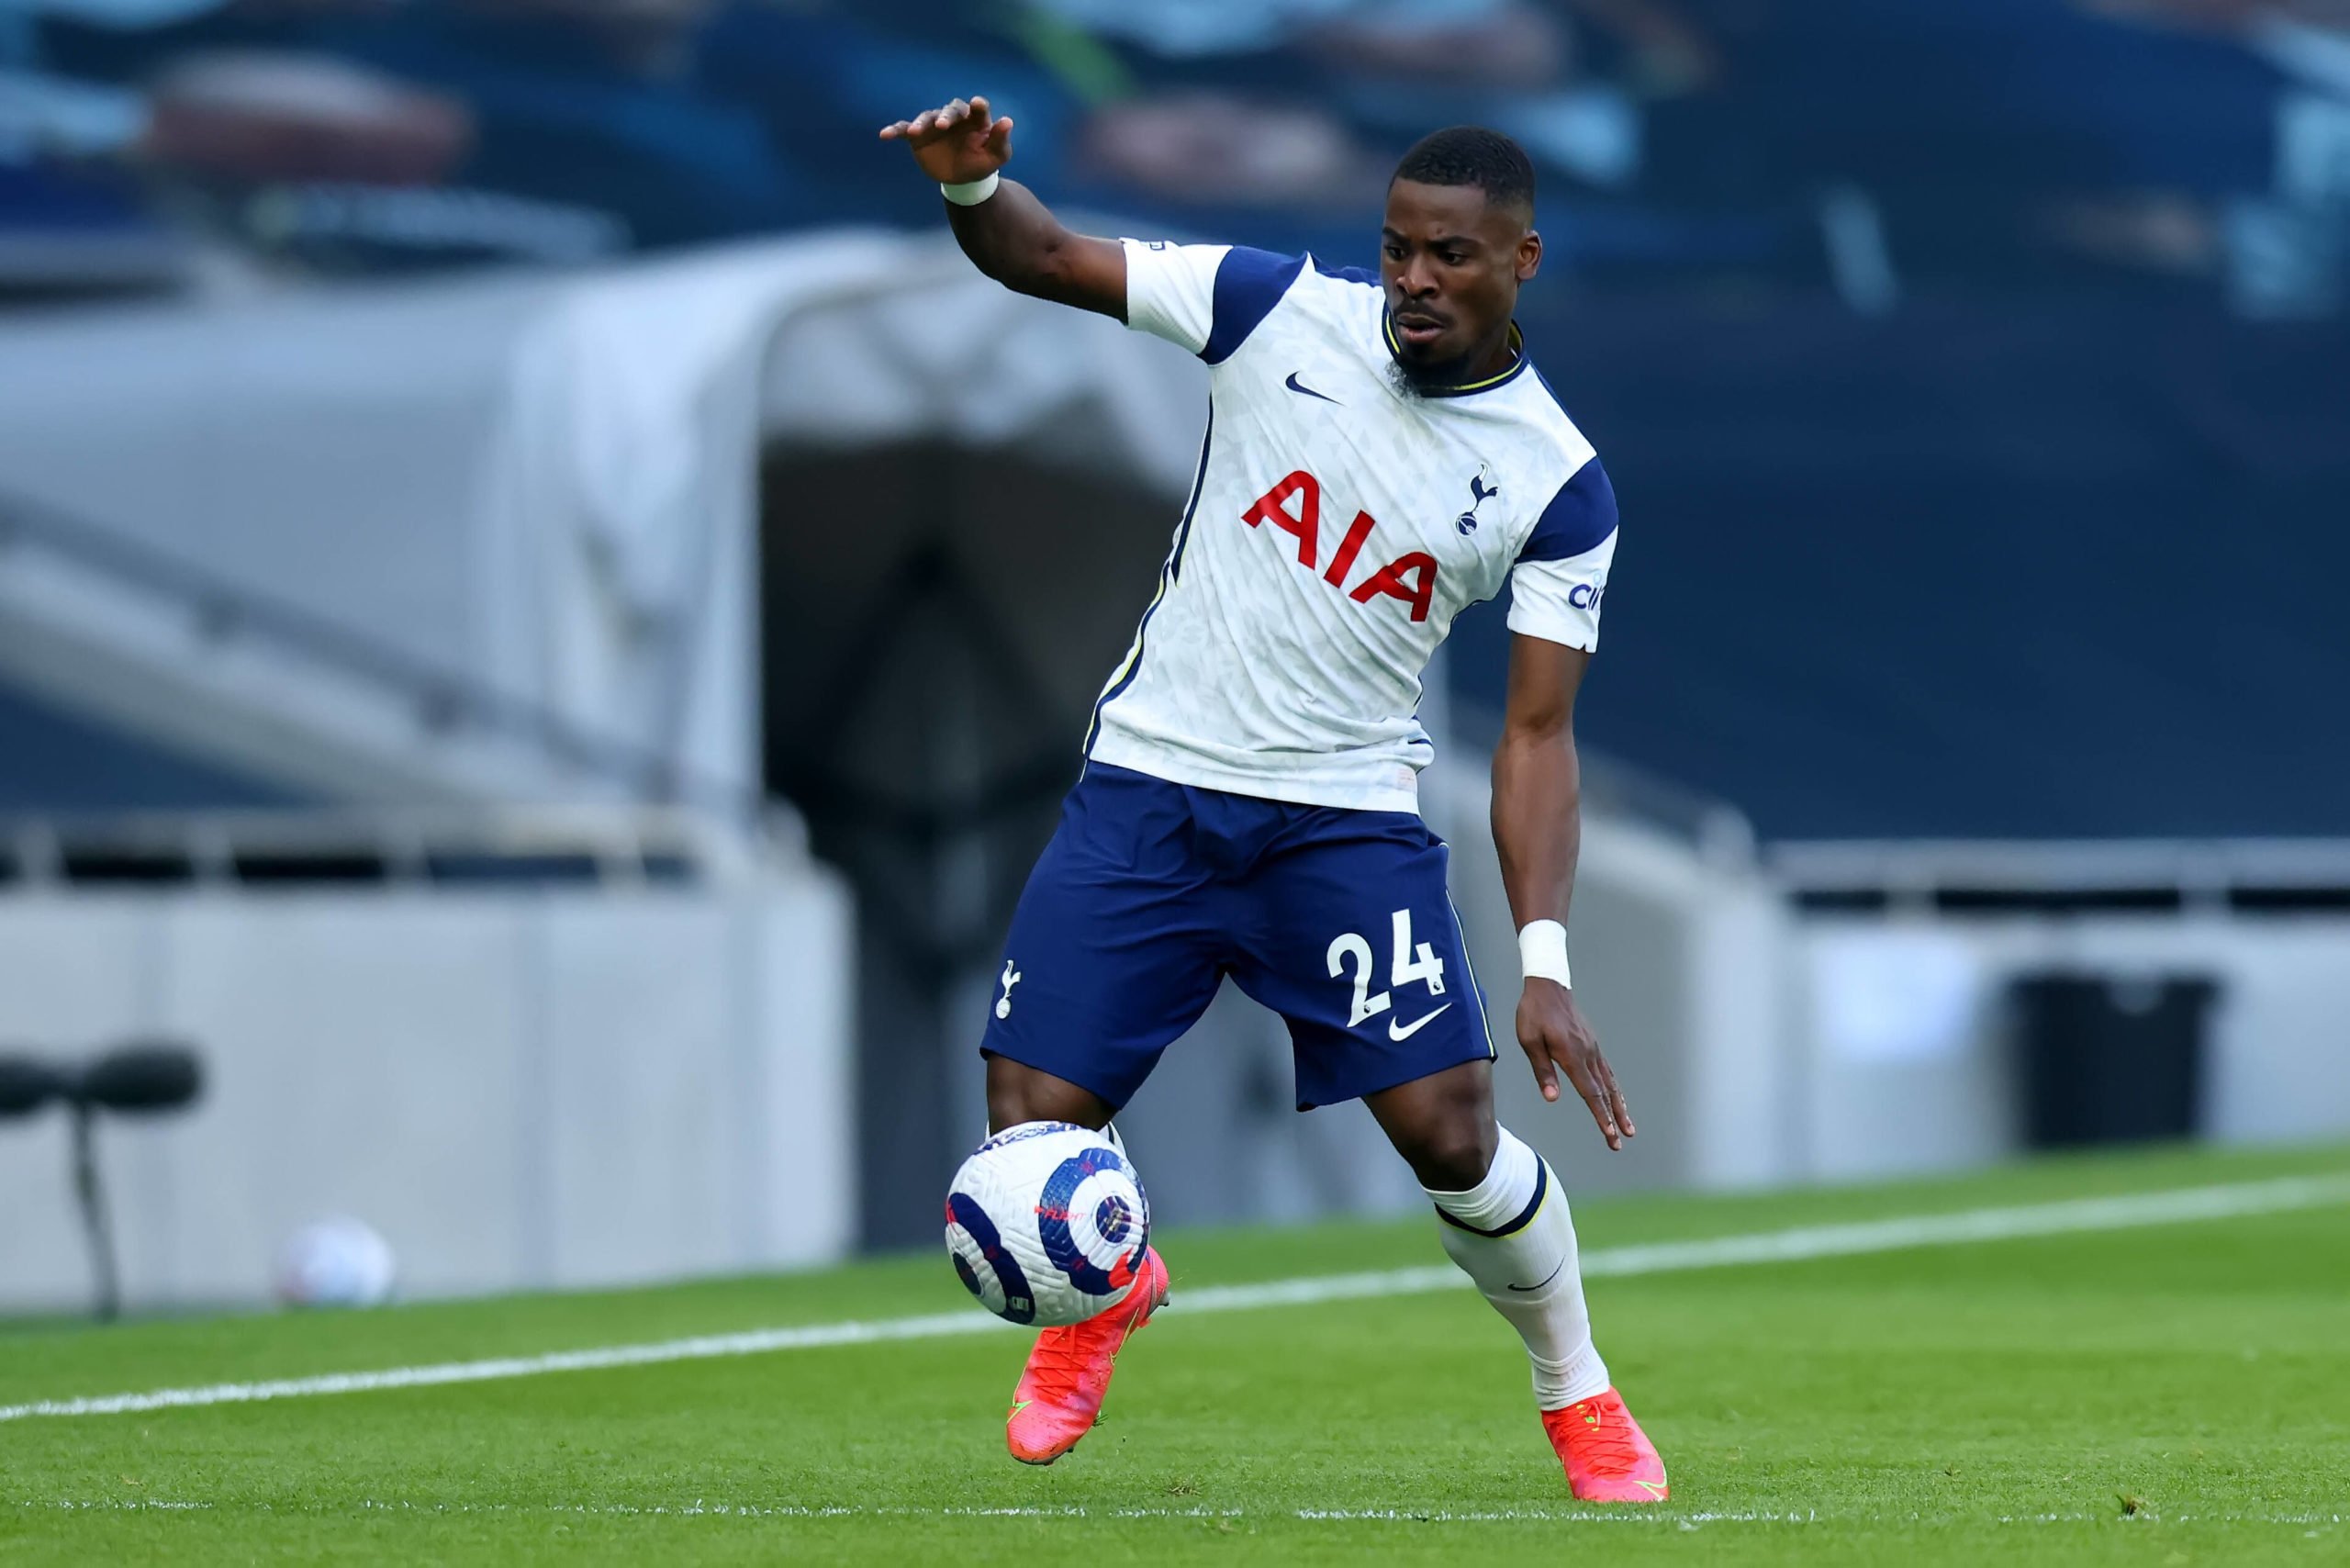 Campbell tips Everton to make a move for Aurier who is seen in the picture